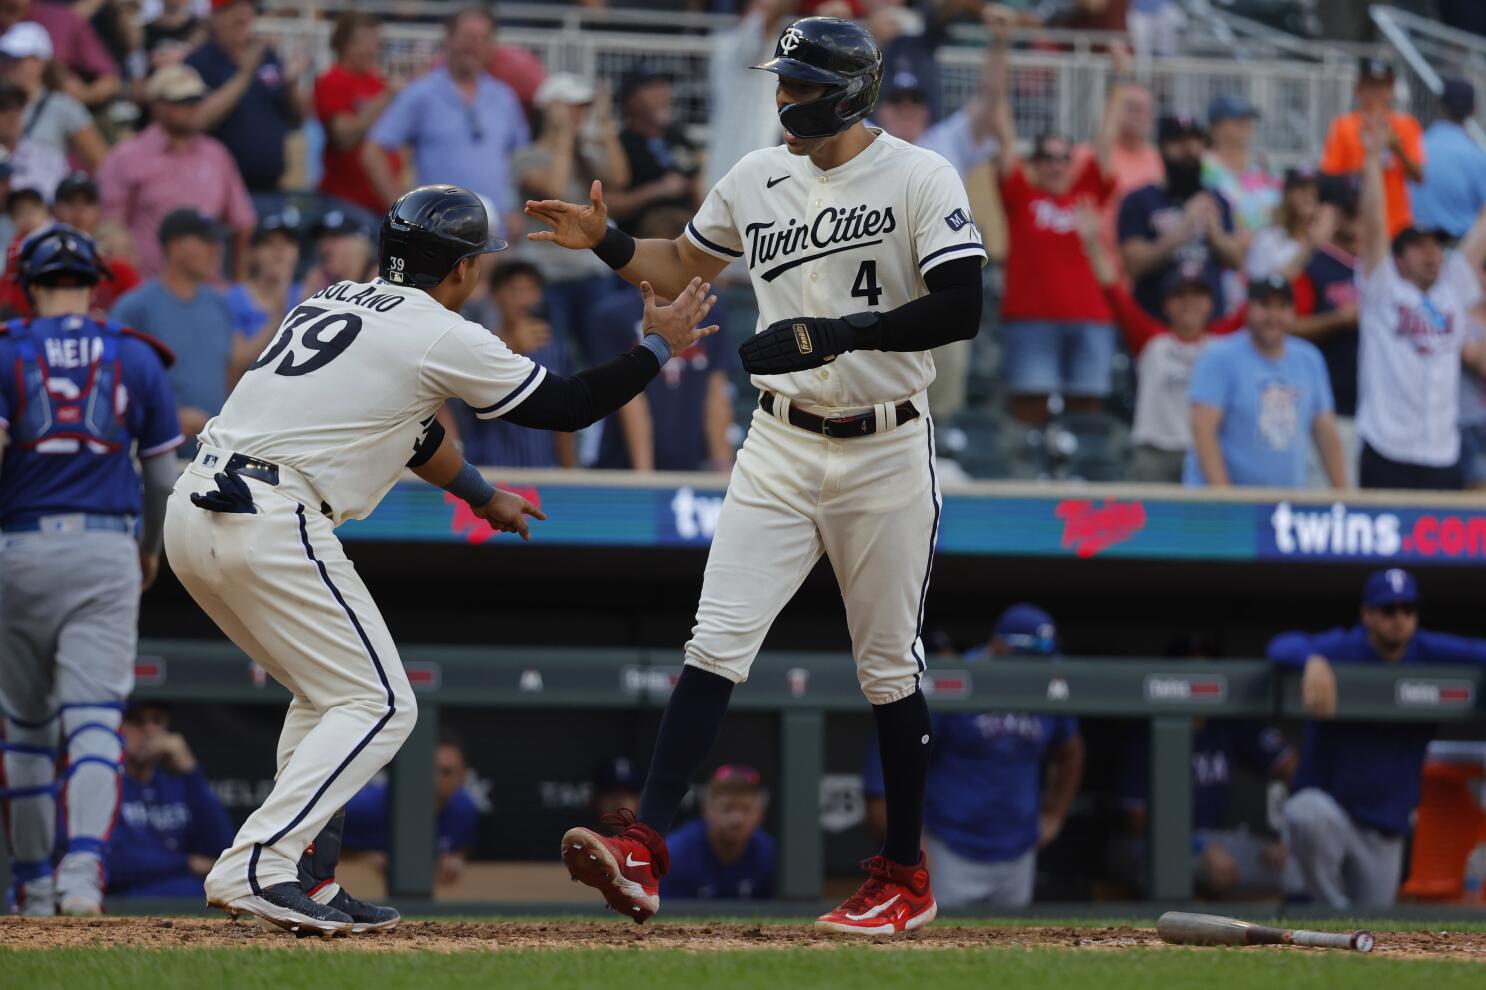 Padres comeback from 6-run deficit, beat L.A. in extras